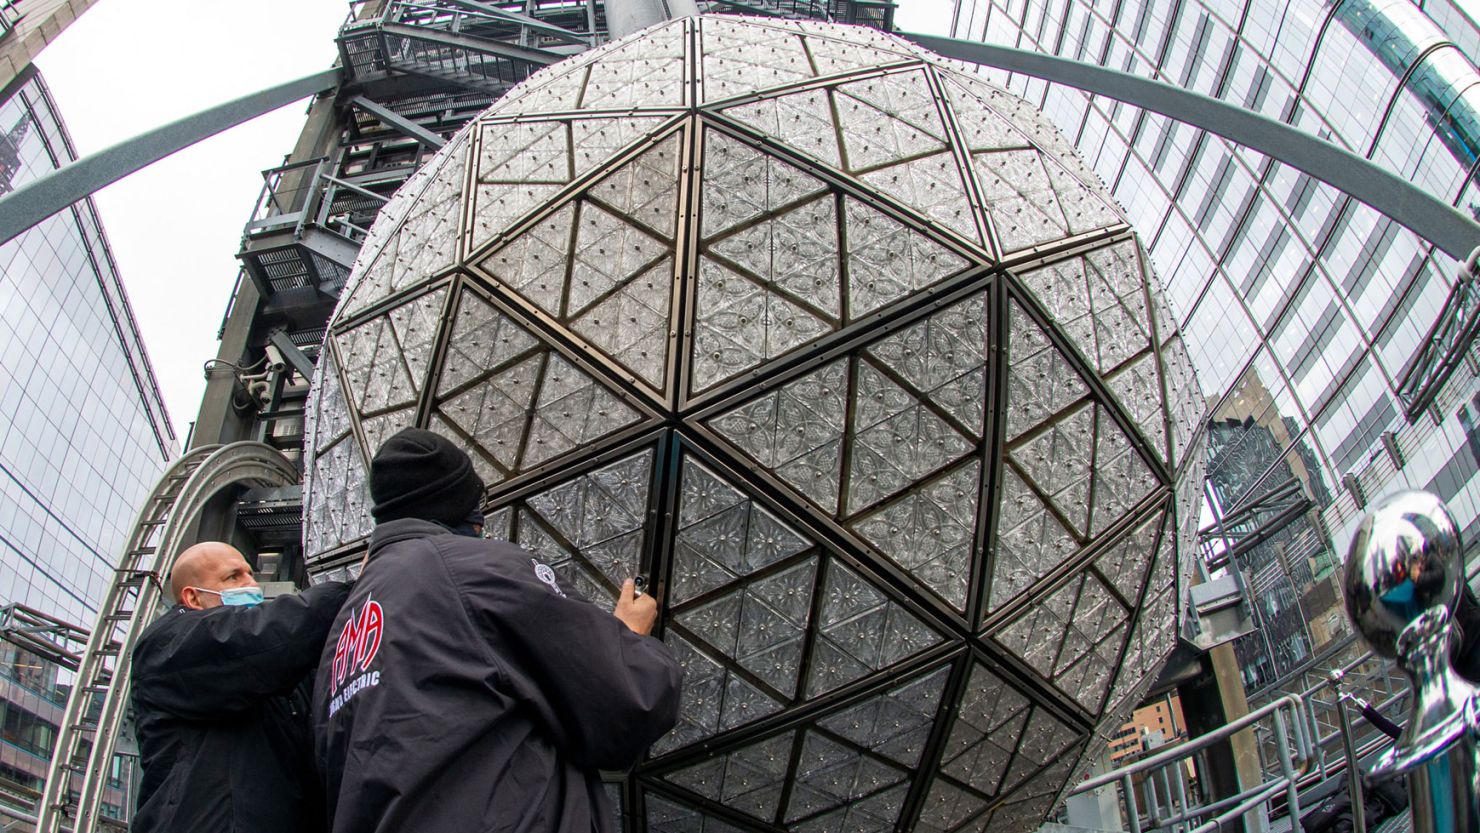 NEW YORK, NEW YORK - DECEMBER 27:  (EDITORS NOTE: Image captured with a fisheye lens.) Workers install 192 new Waterford Crystal triangles featuring this year's 'Gift of Wisdom' design on December 27, 2021 in New York City. The 12-foot in diameter, 11,875 pounds ball is covered in a total of 2,688 Waterford Crystal triangles which are bolted to 672 LED modules. On December 23rd, Mayor Bill de Blasio announced that New Year's Eve in Times Square will be limited to 15,000 socially distanced visitors that will be required to be fully vaccinated due to a rise in COVID-19 cases. (Photo by Alexi Rosenfeld/Getty Images)